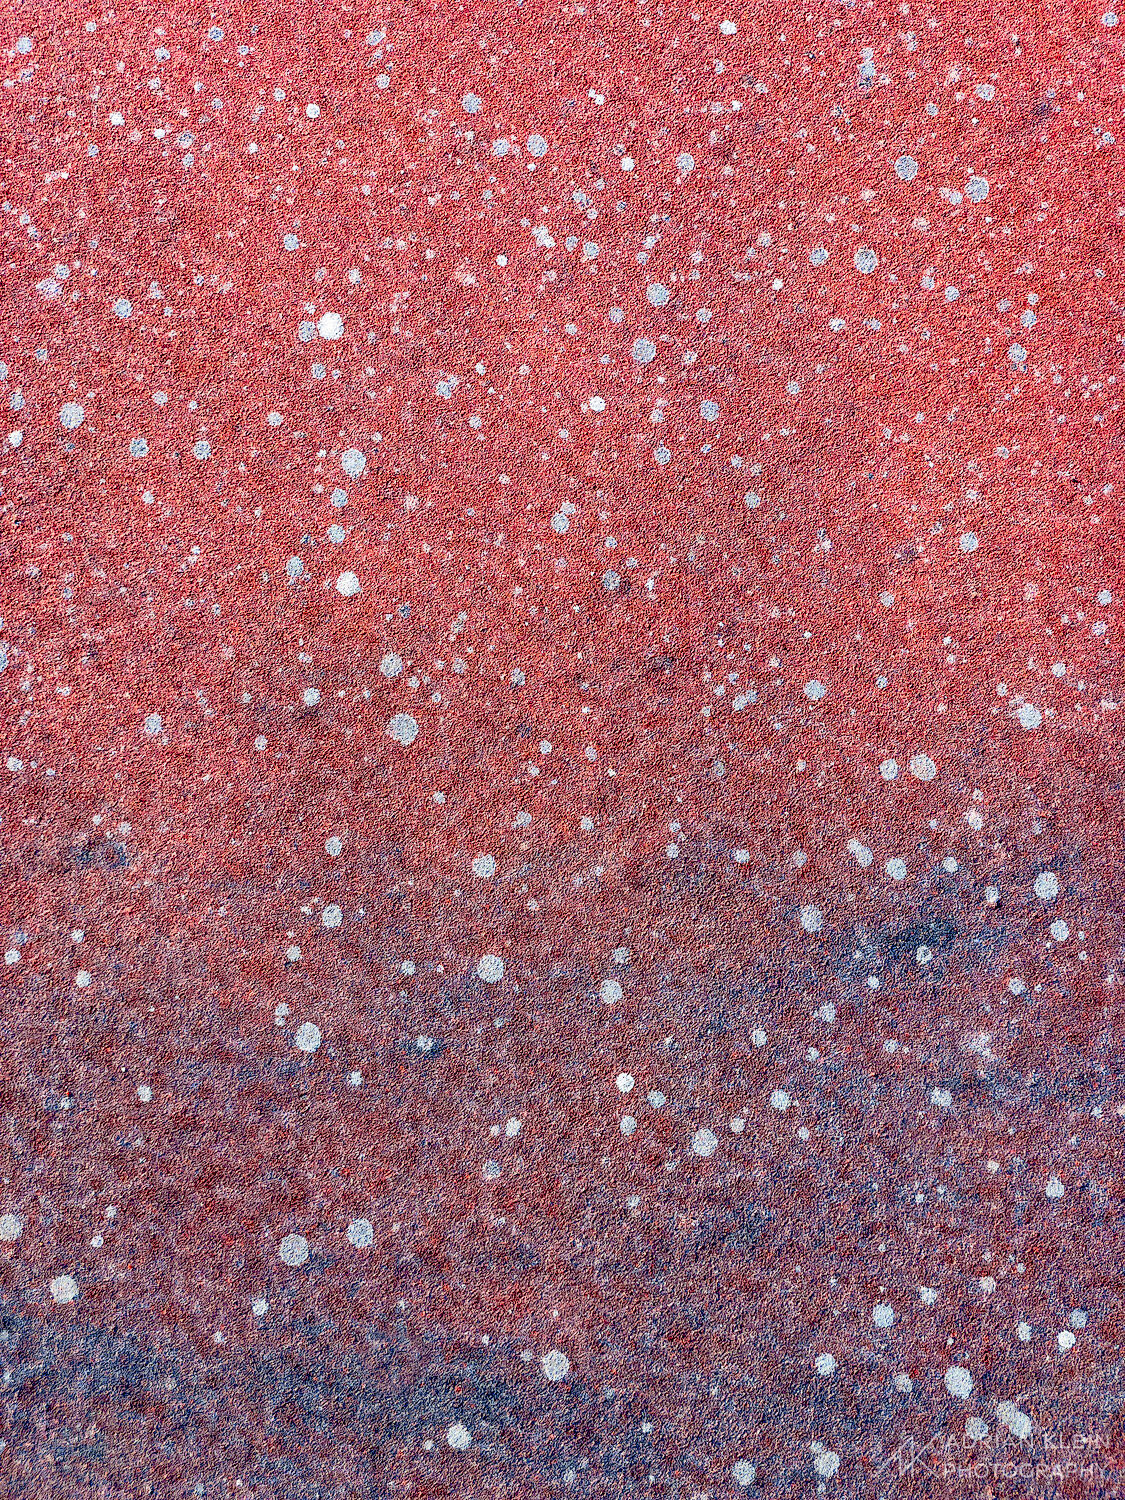 Surface of tennis court bringing out the red, white and blue from both the natural surface and the slow deterioration with mold...